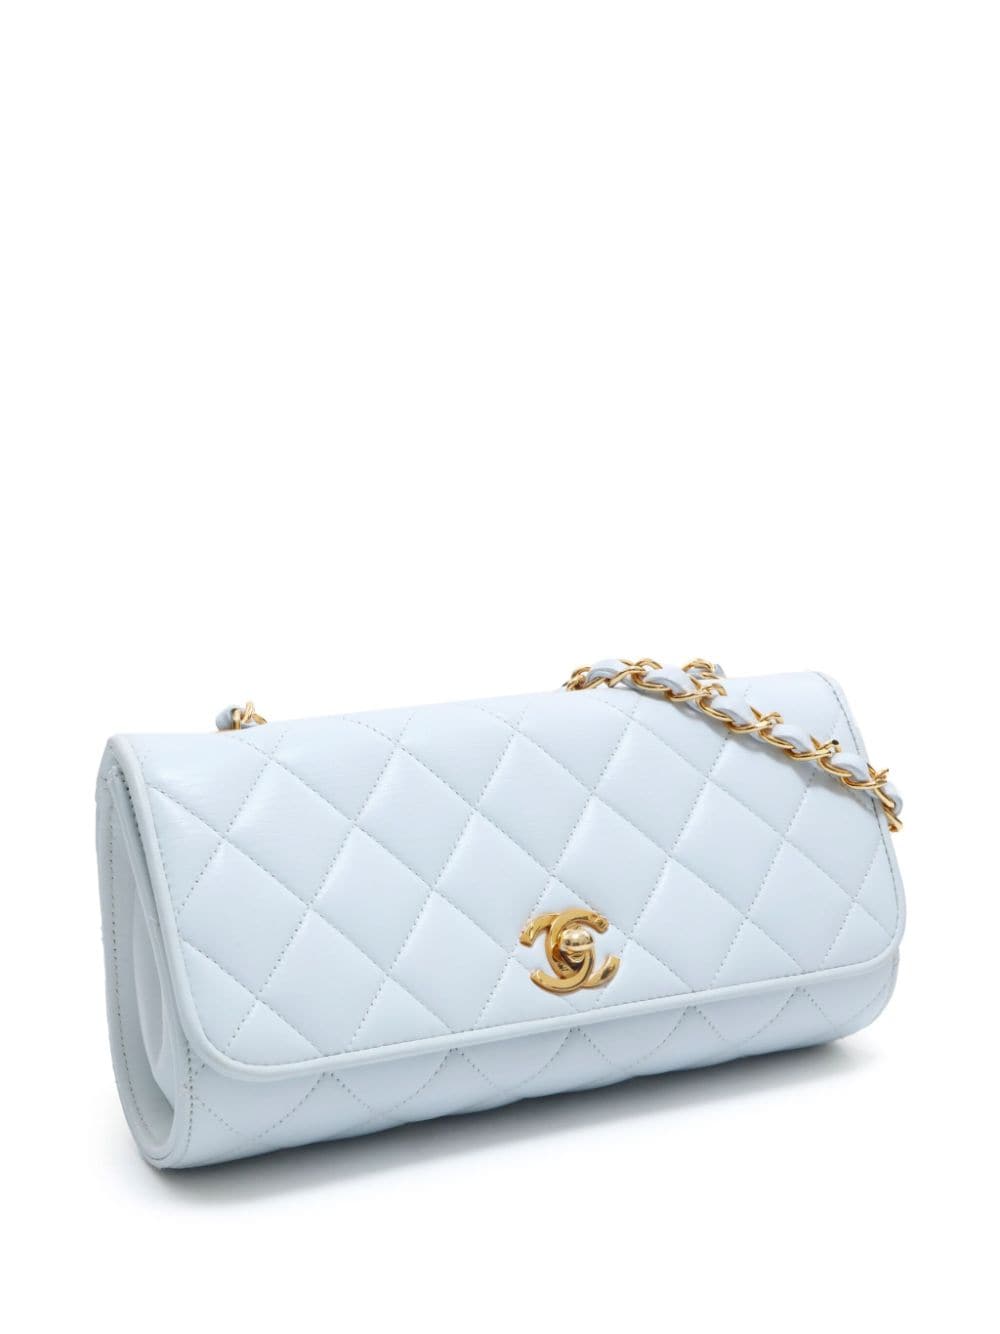 Pre-owned Chanel 1995 Cc Diamond-quilted Flap Shoulder Bag In White